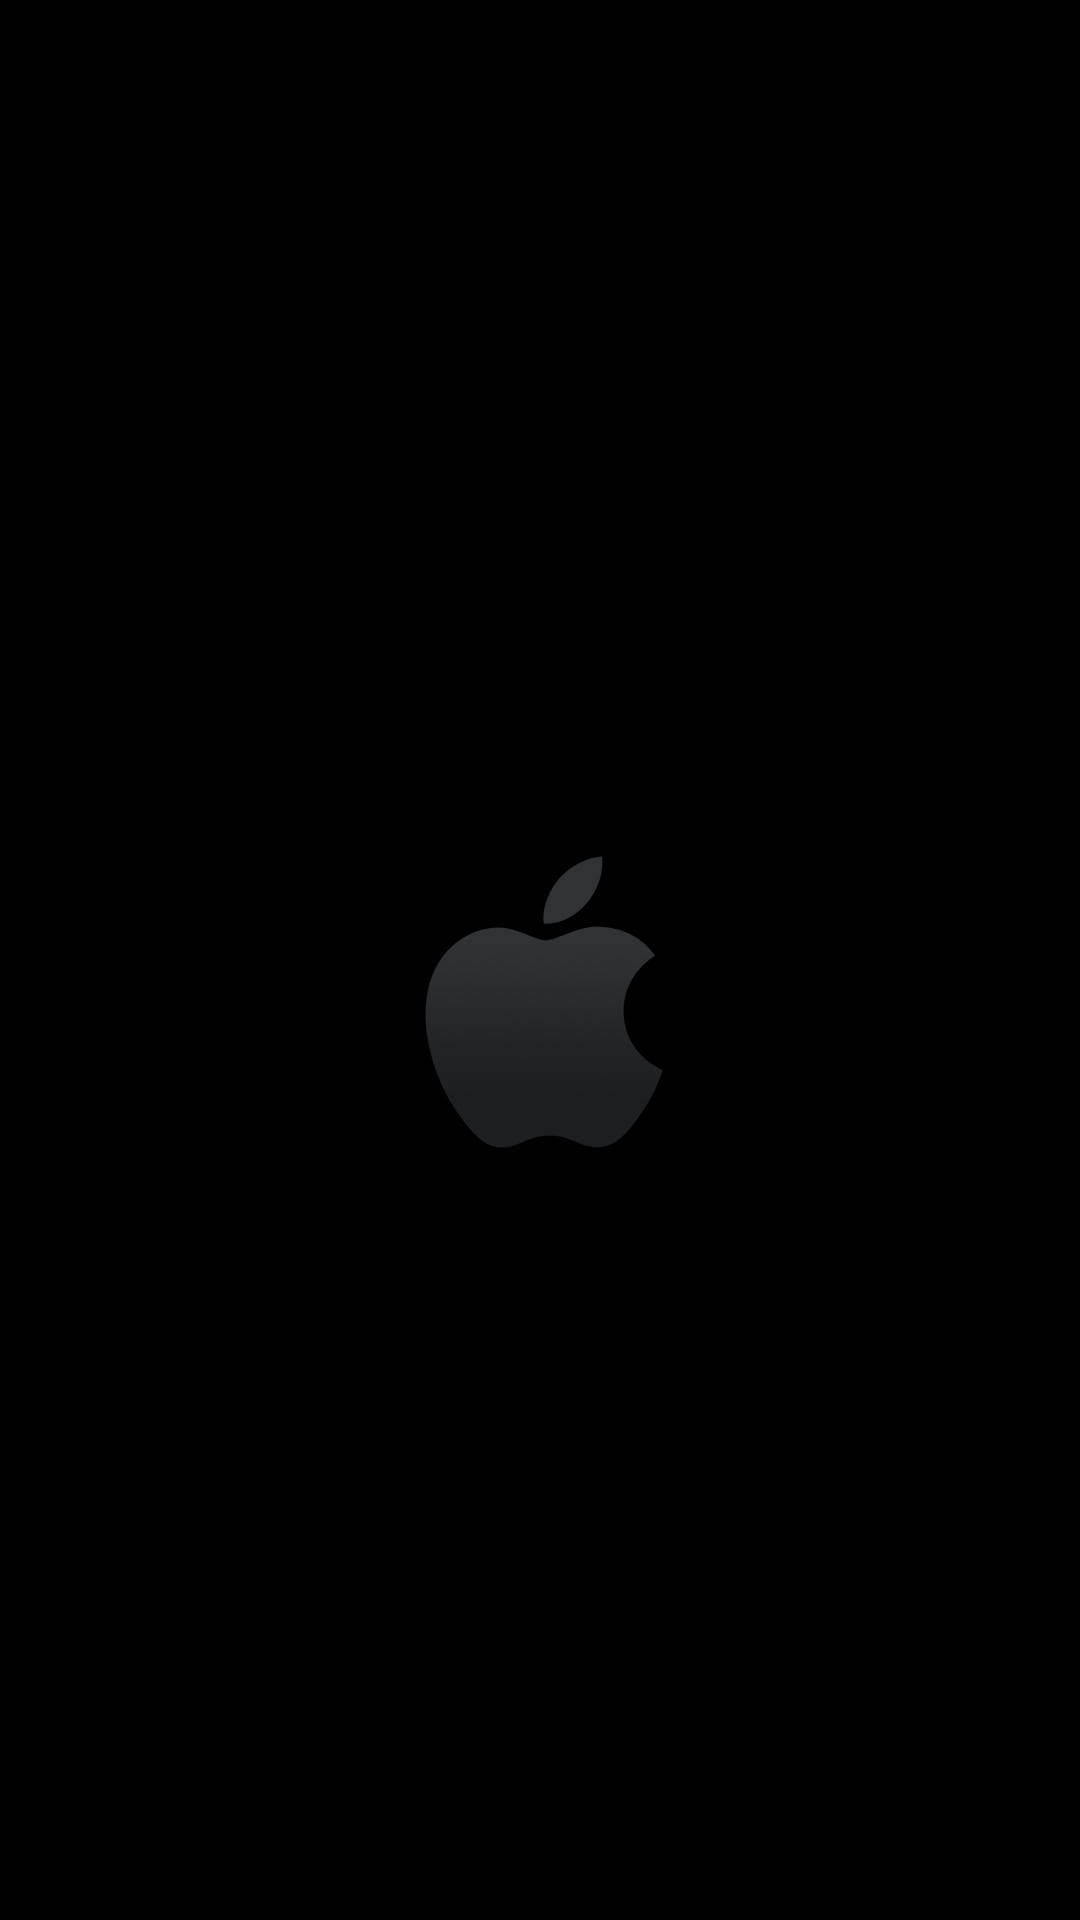 Full Hd Apple In Black Picture